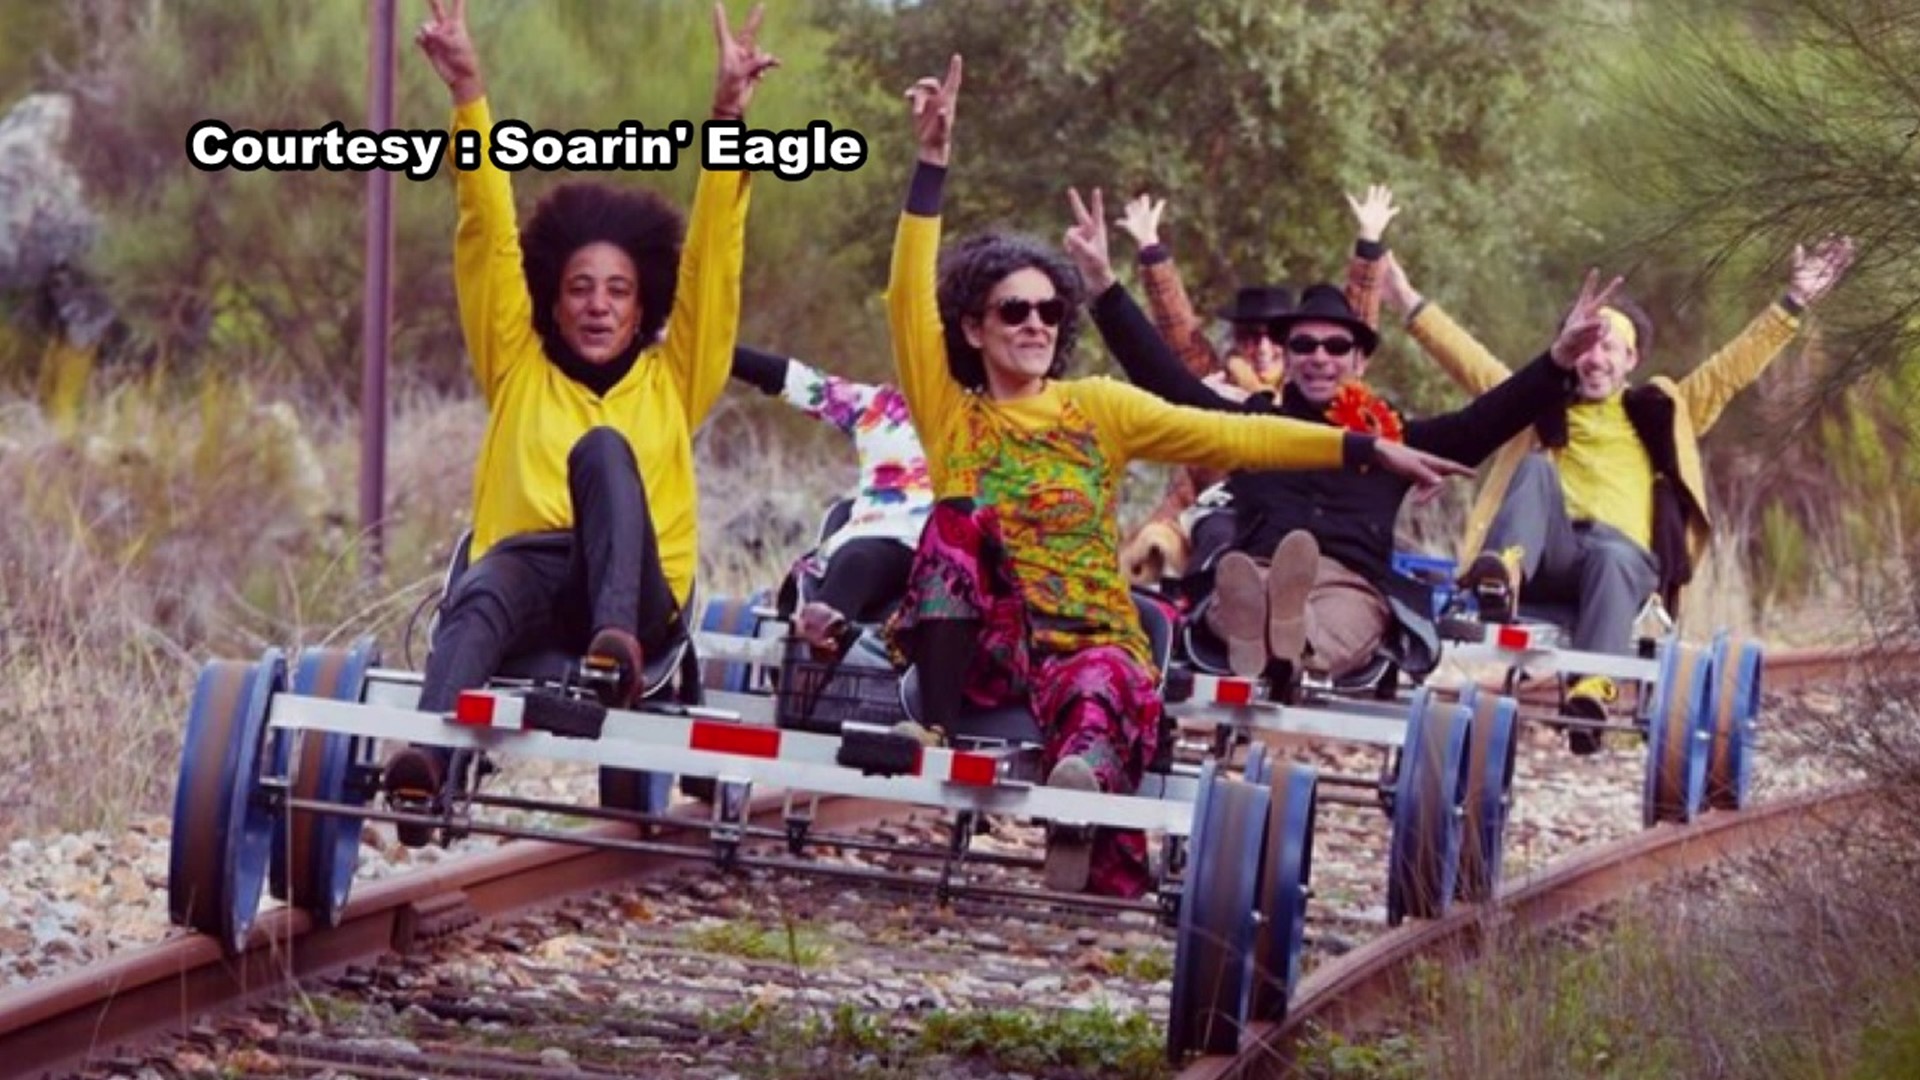 Soarin' Eagle Railbike Tours is preparing to open a section of rails in and around Hawley.